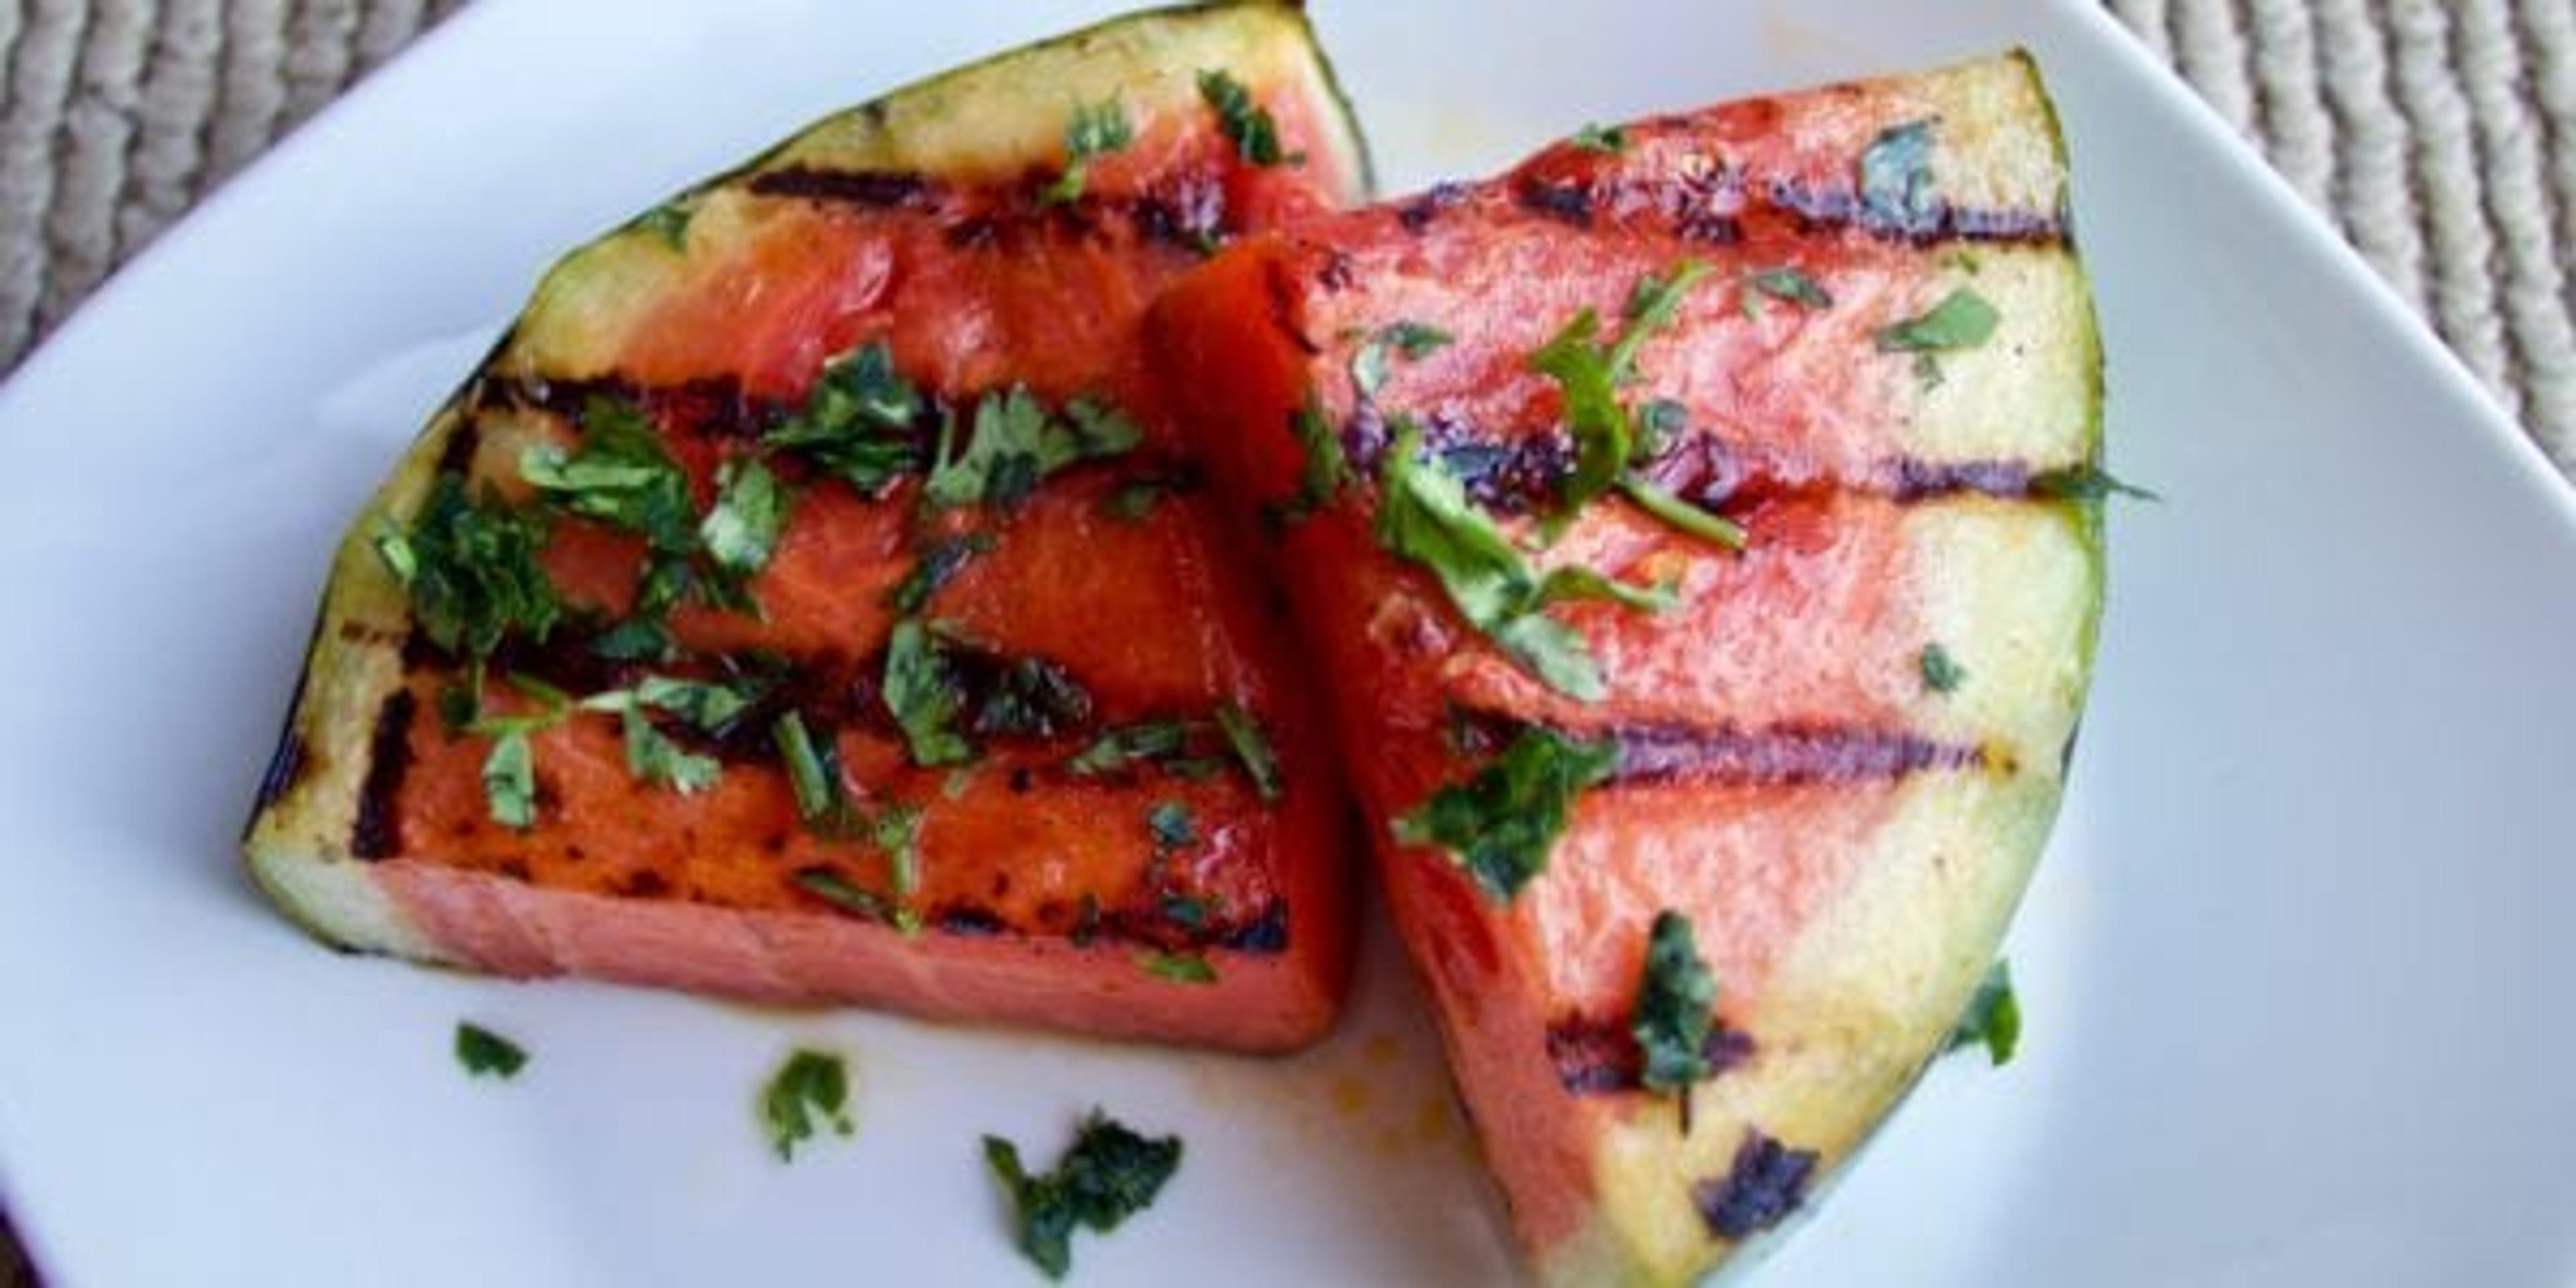 Grilled watermelon on a plate